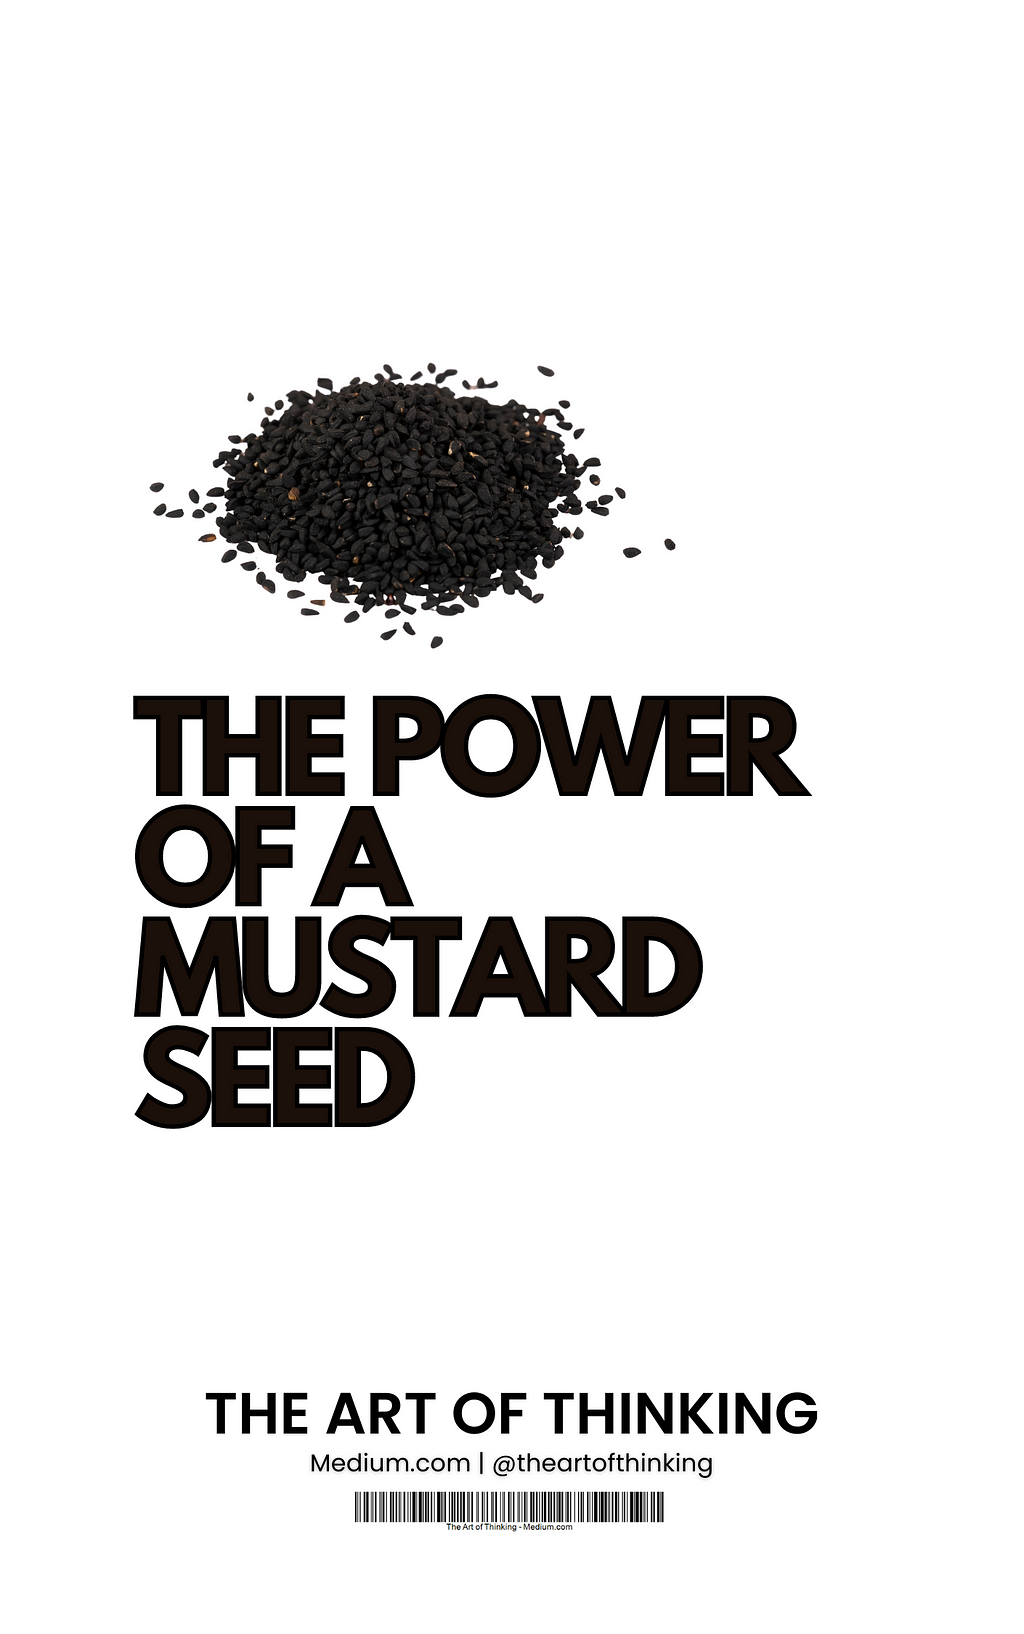 The image of mustard seeds and a text “The power of a mustard seed”